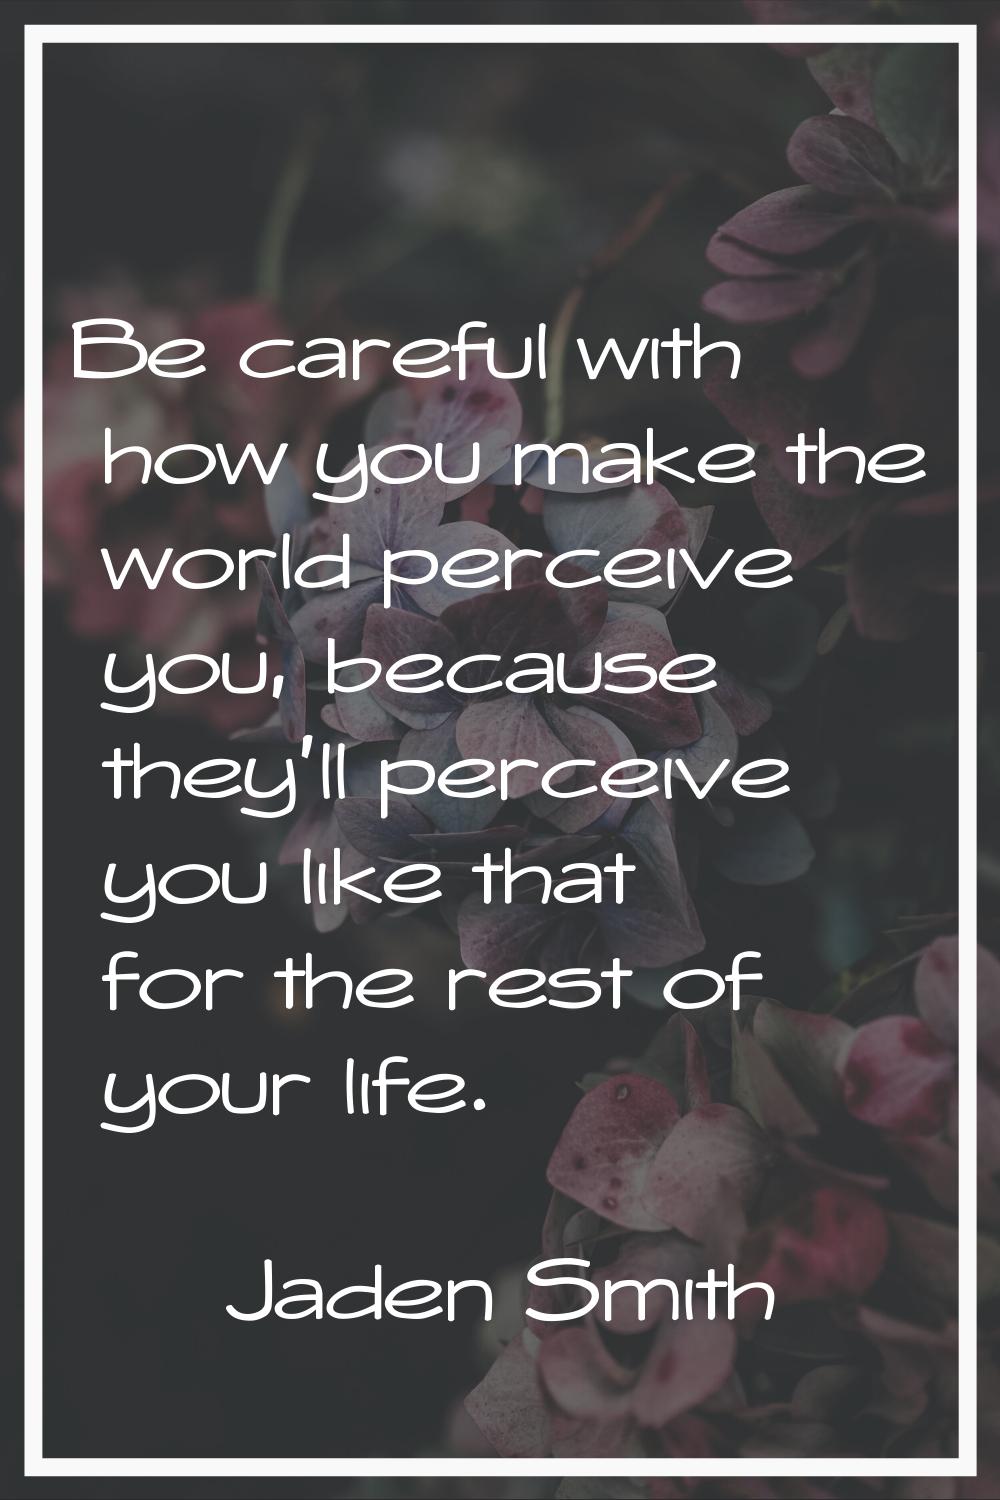 Be careful with how you make the world perceive you, because they'll perceive you like that for the